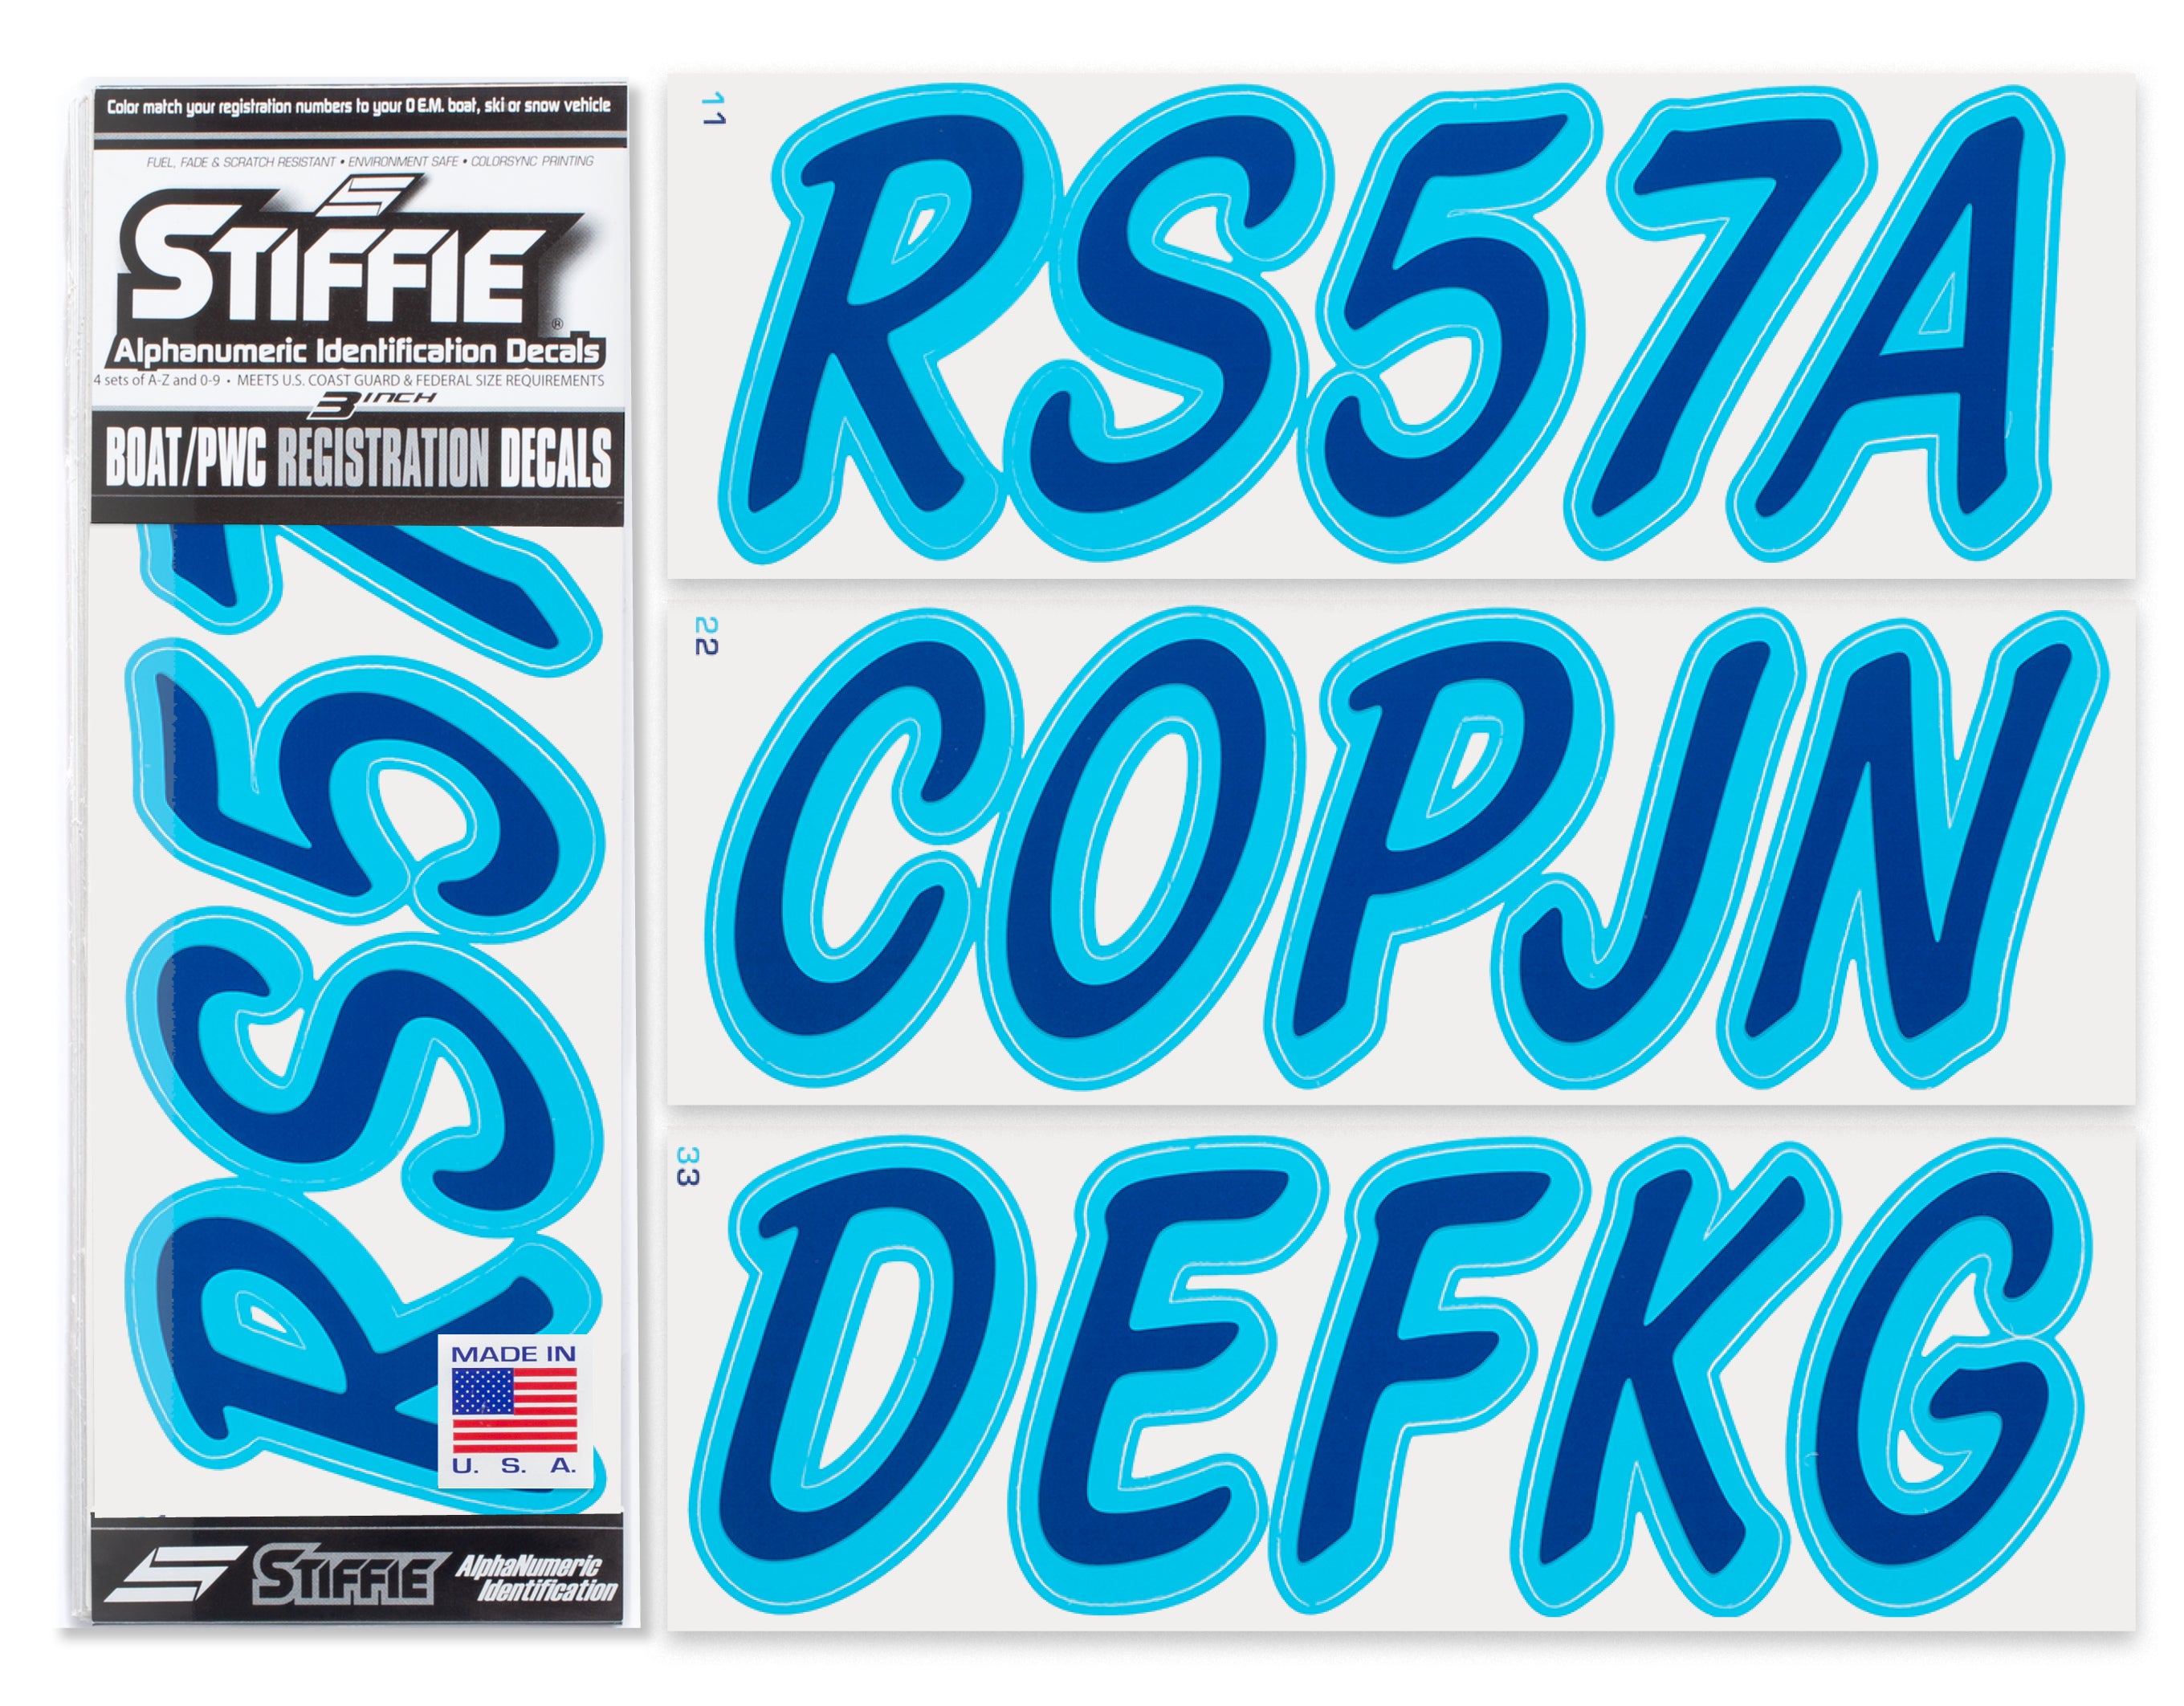 STIFFIE Whipline Solid Navy/Sky Blue 3" Alpha-Numeric Registration Identification Numbers Stickers Decals for Boats & Personal Watercraft